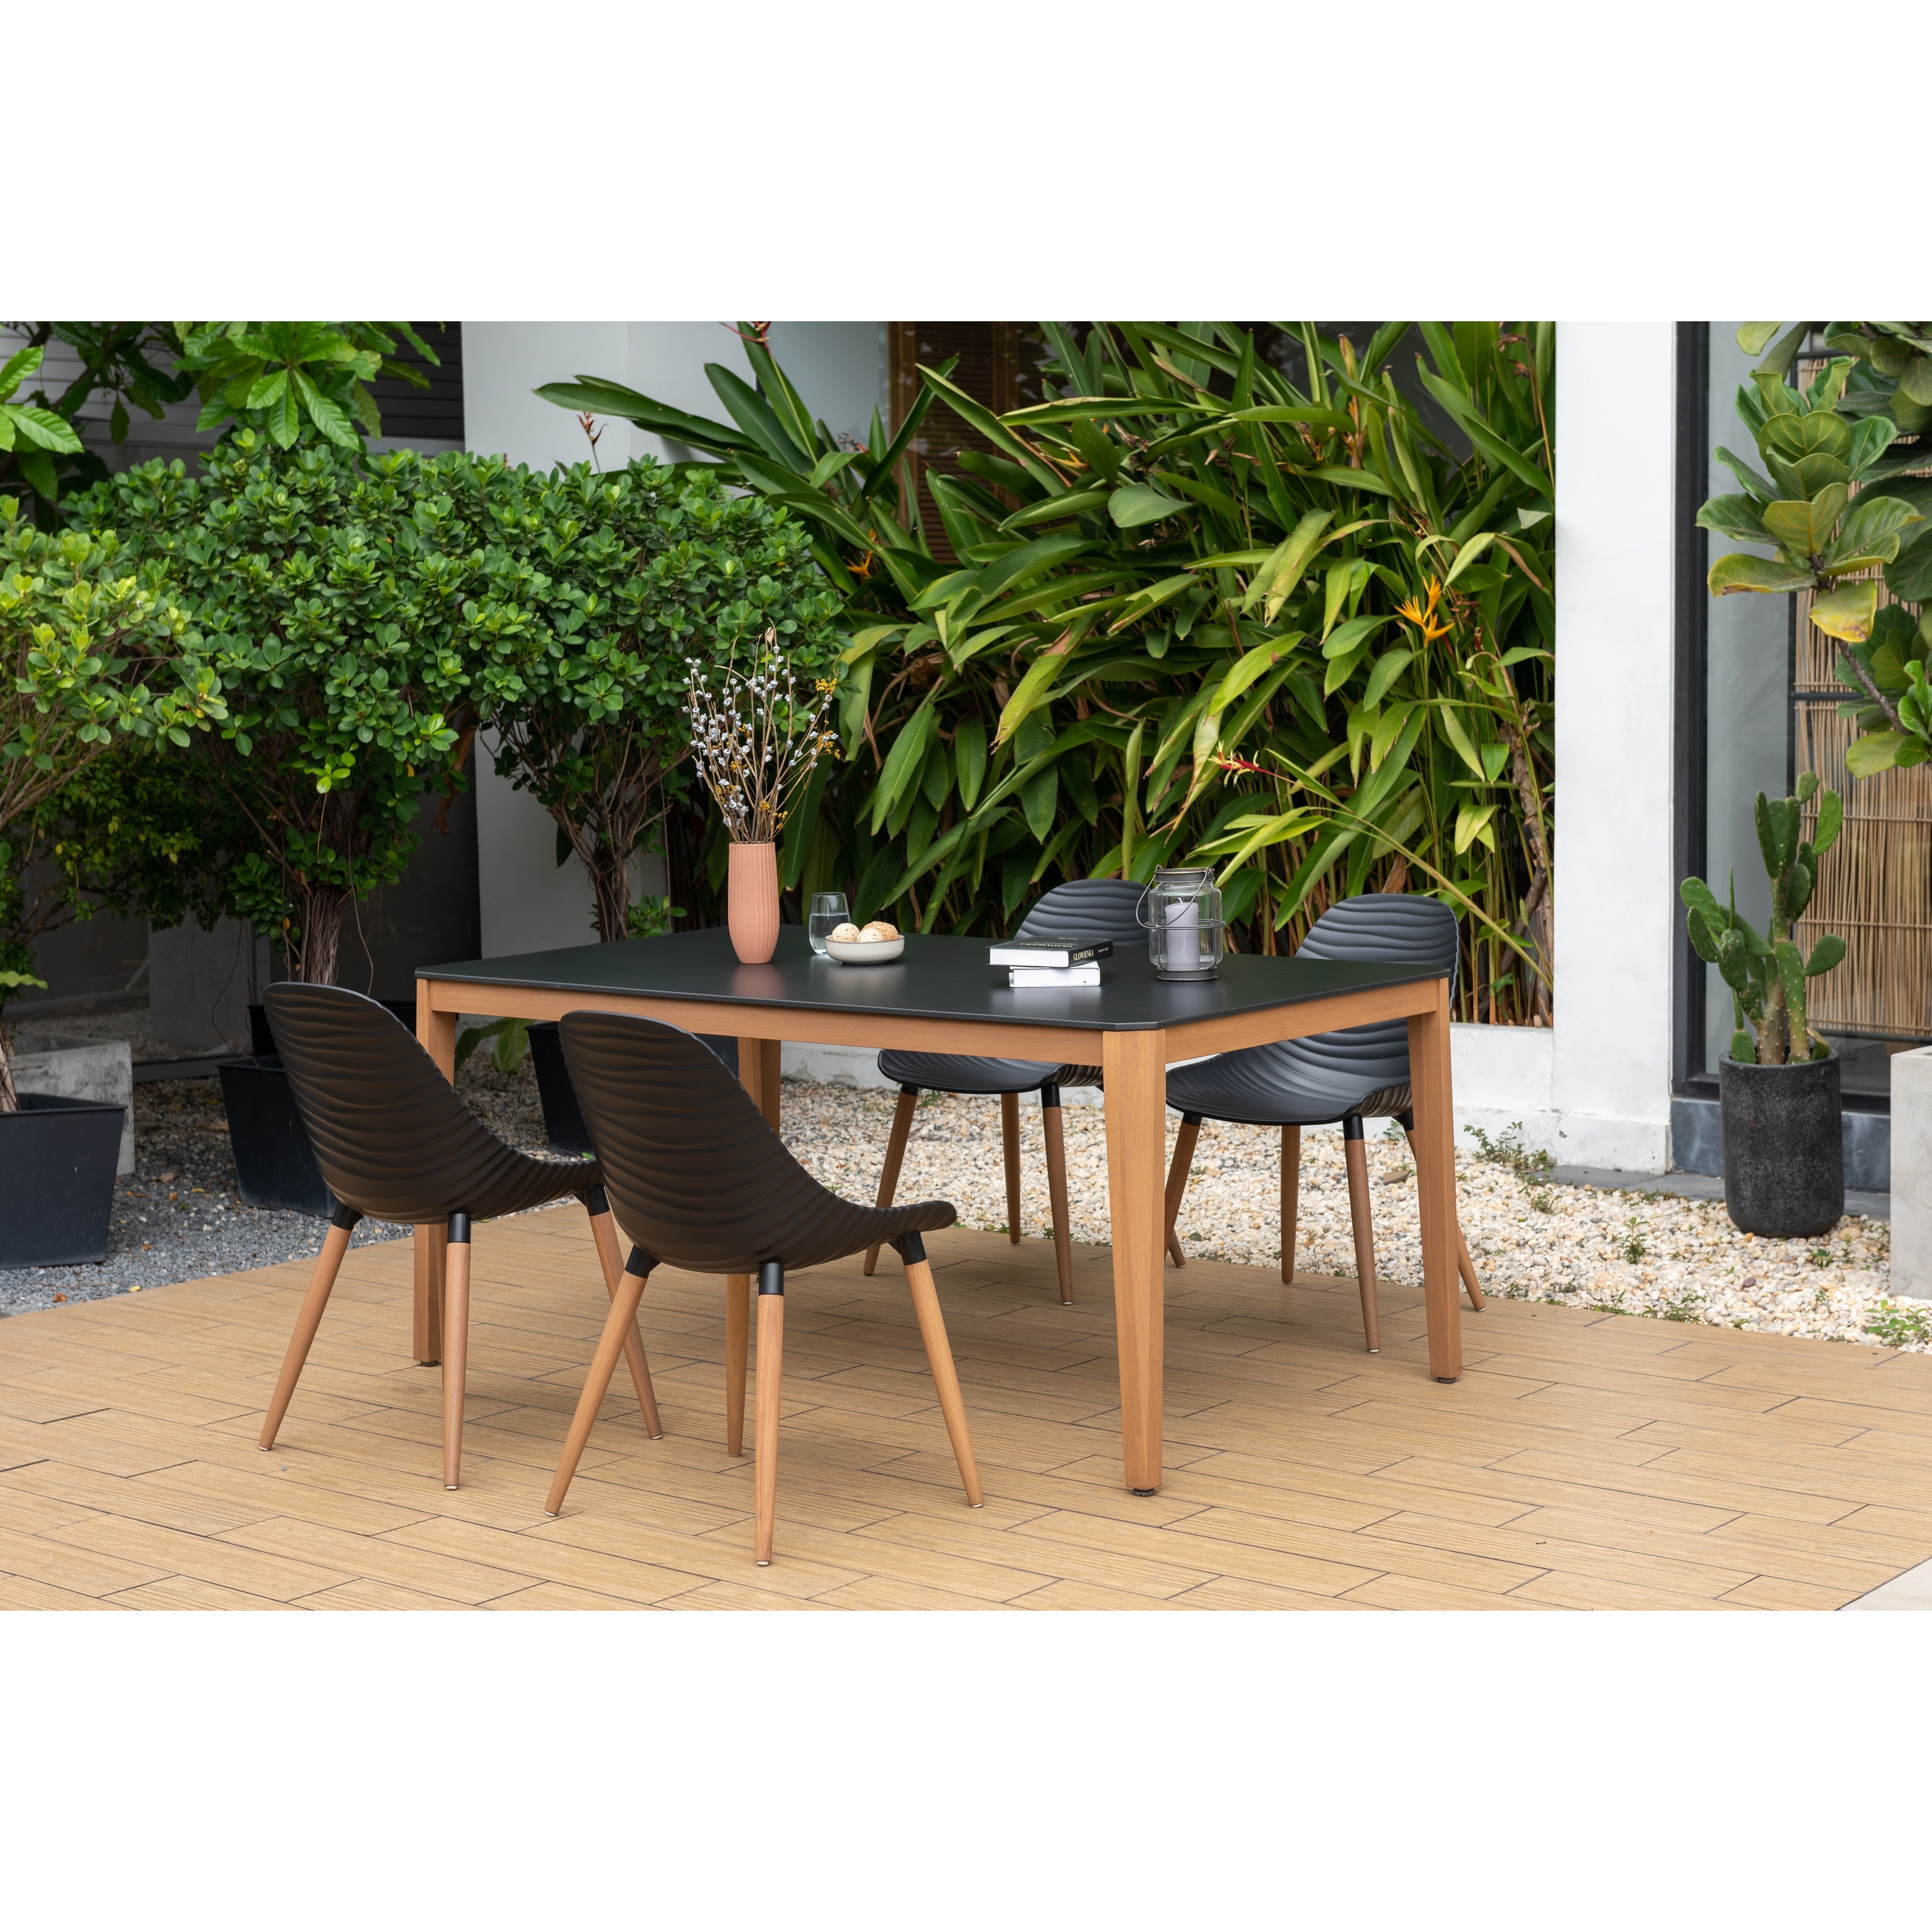 Amazonia Fsc Certified Wood Jenhuer Outdoor Patio Dining Set